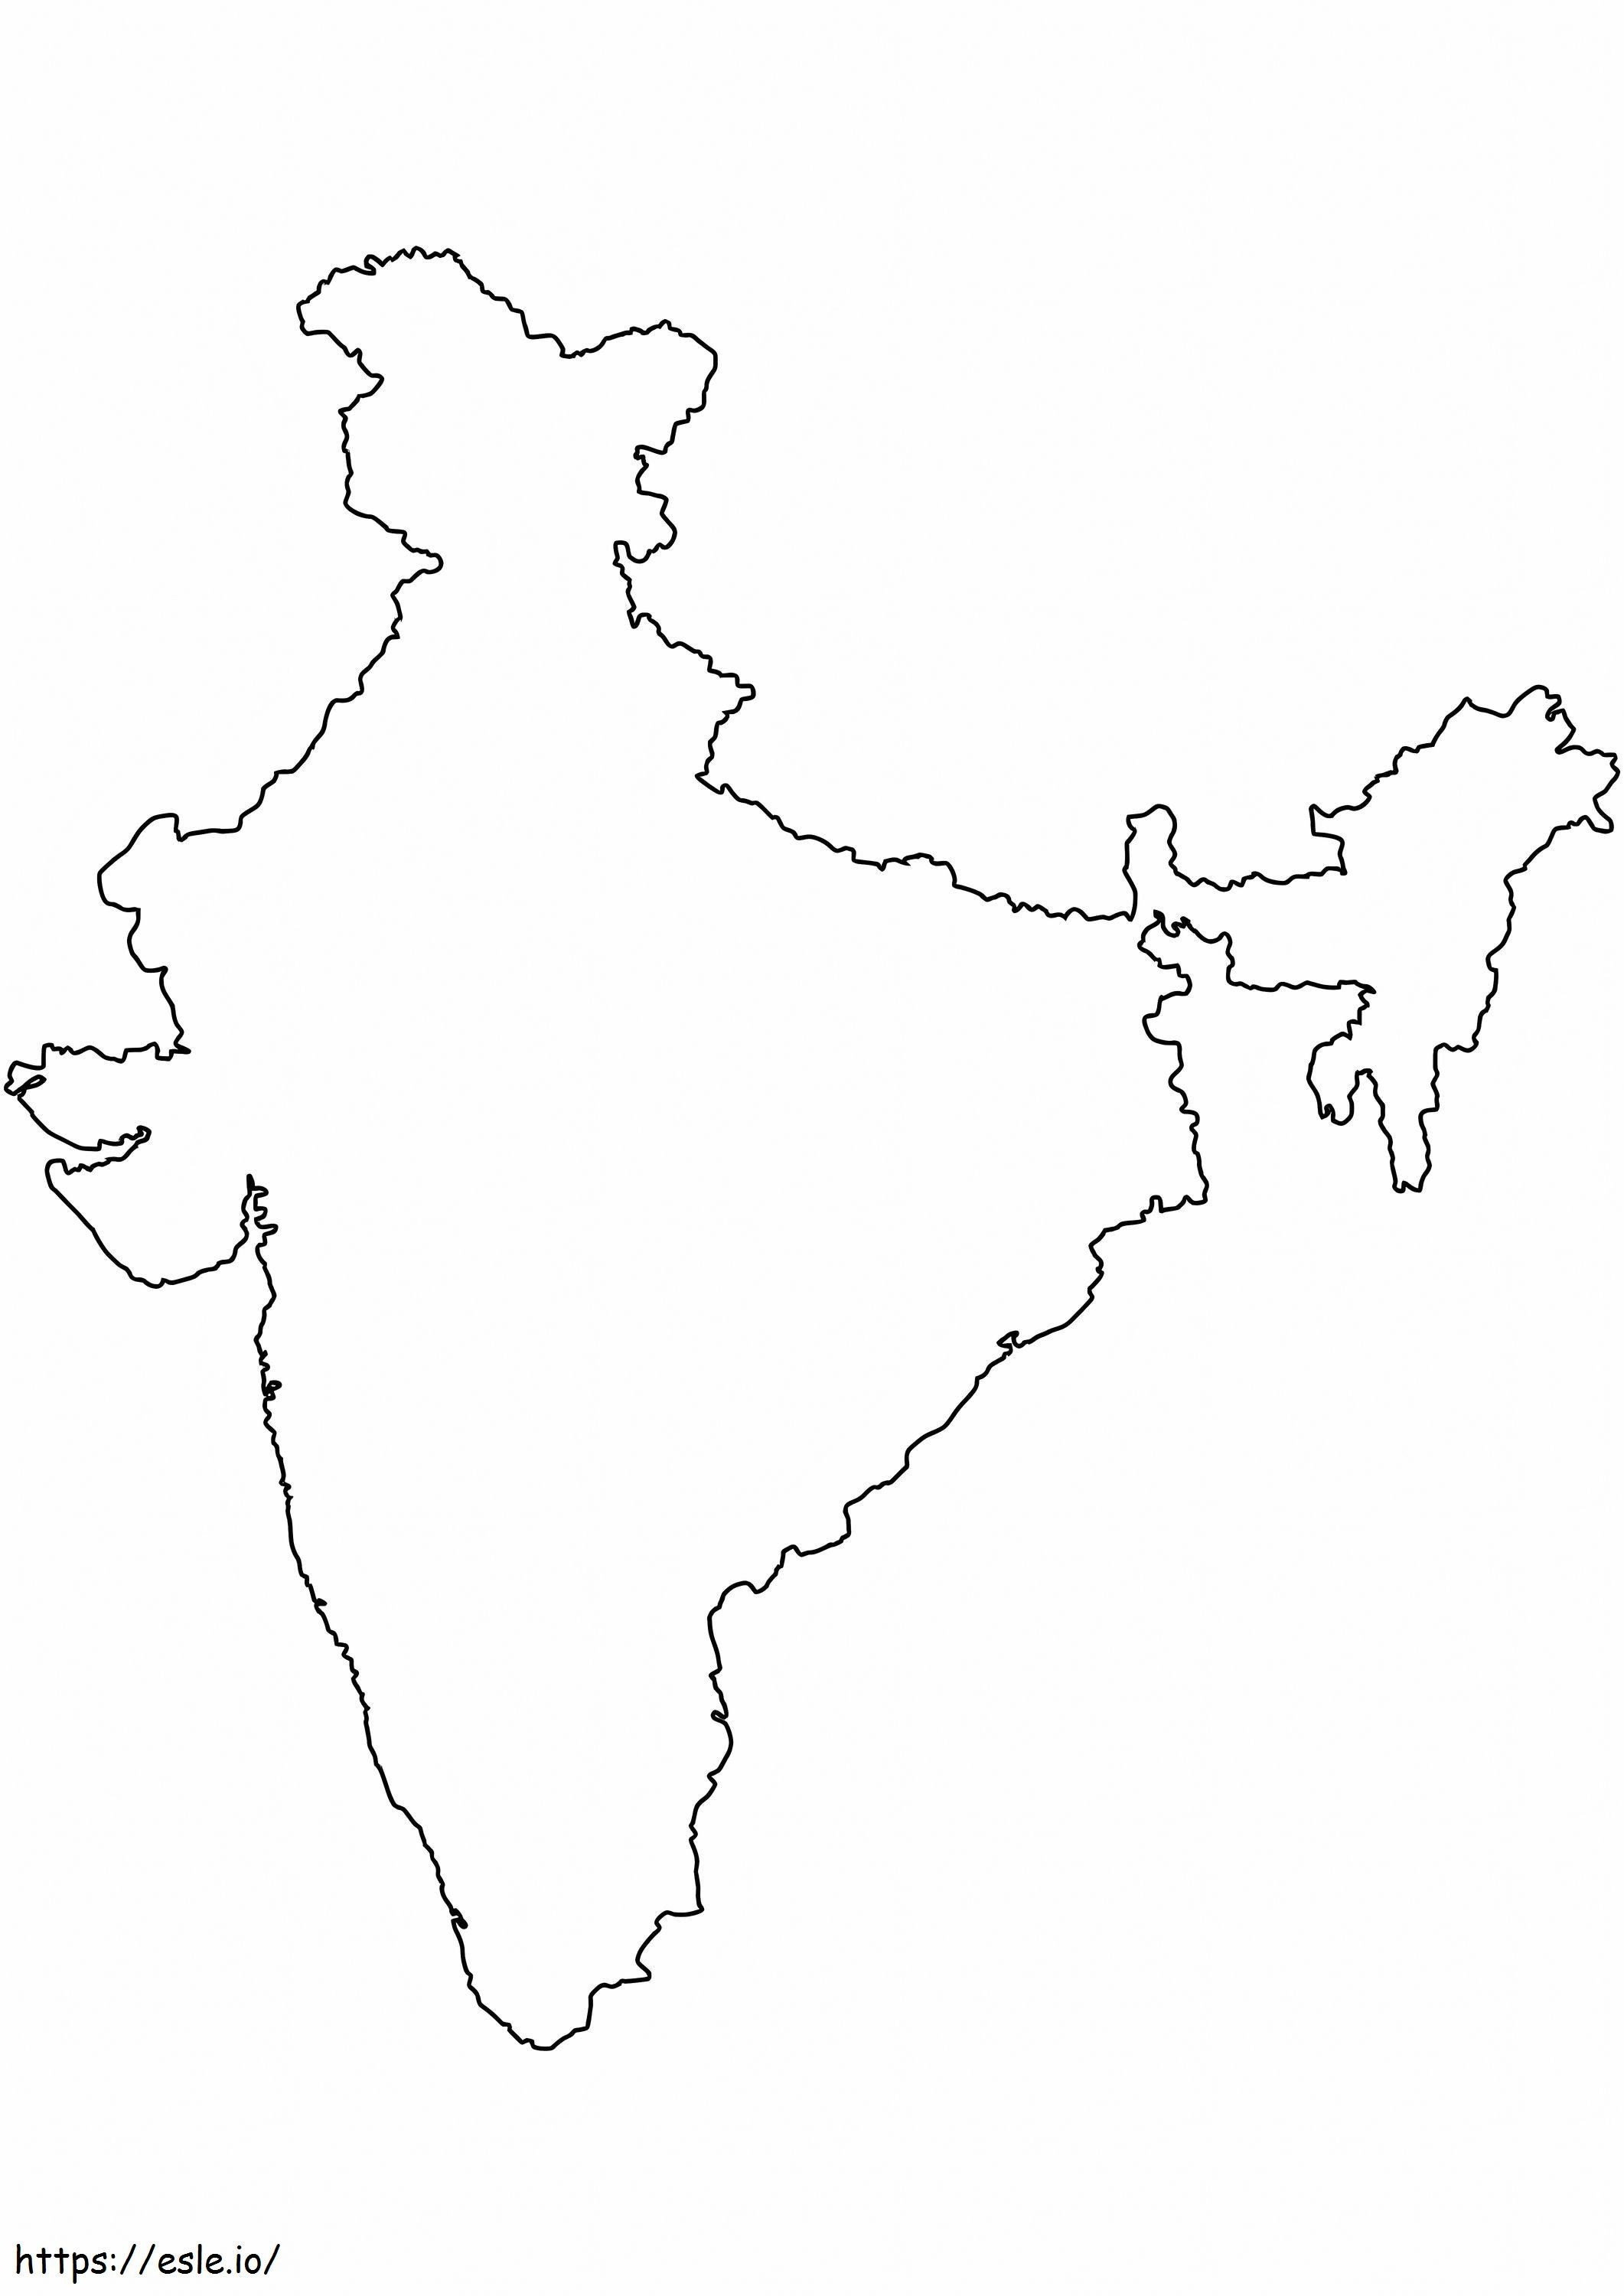 India Blank Outline Map coloring page